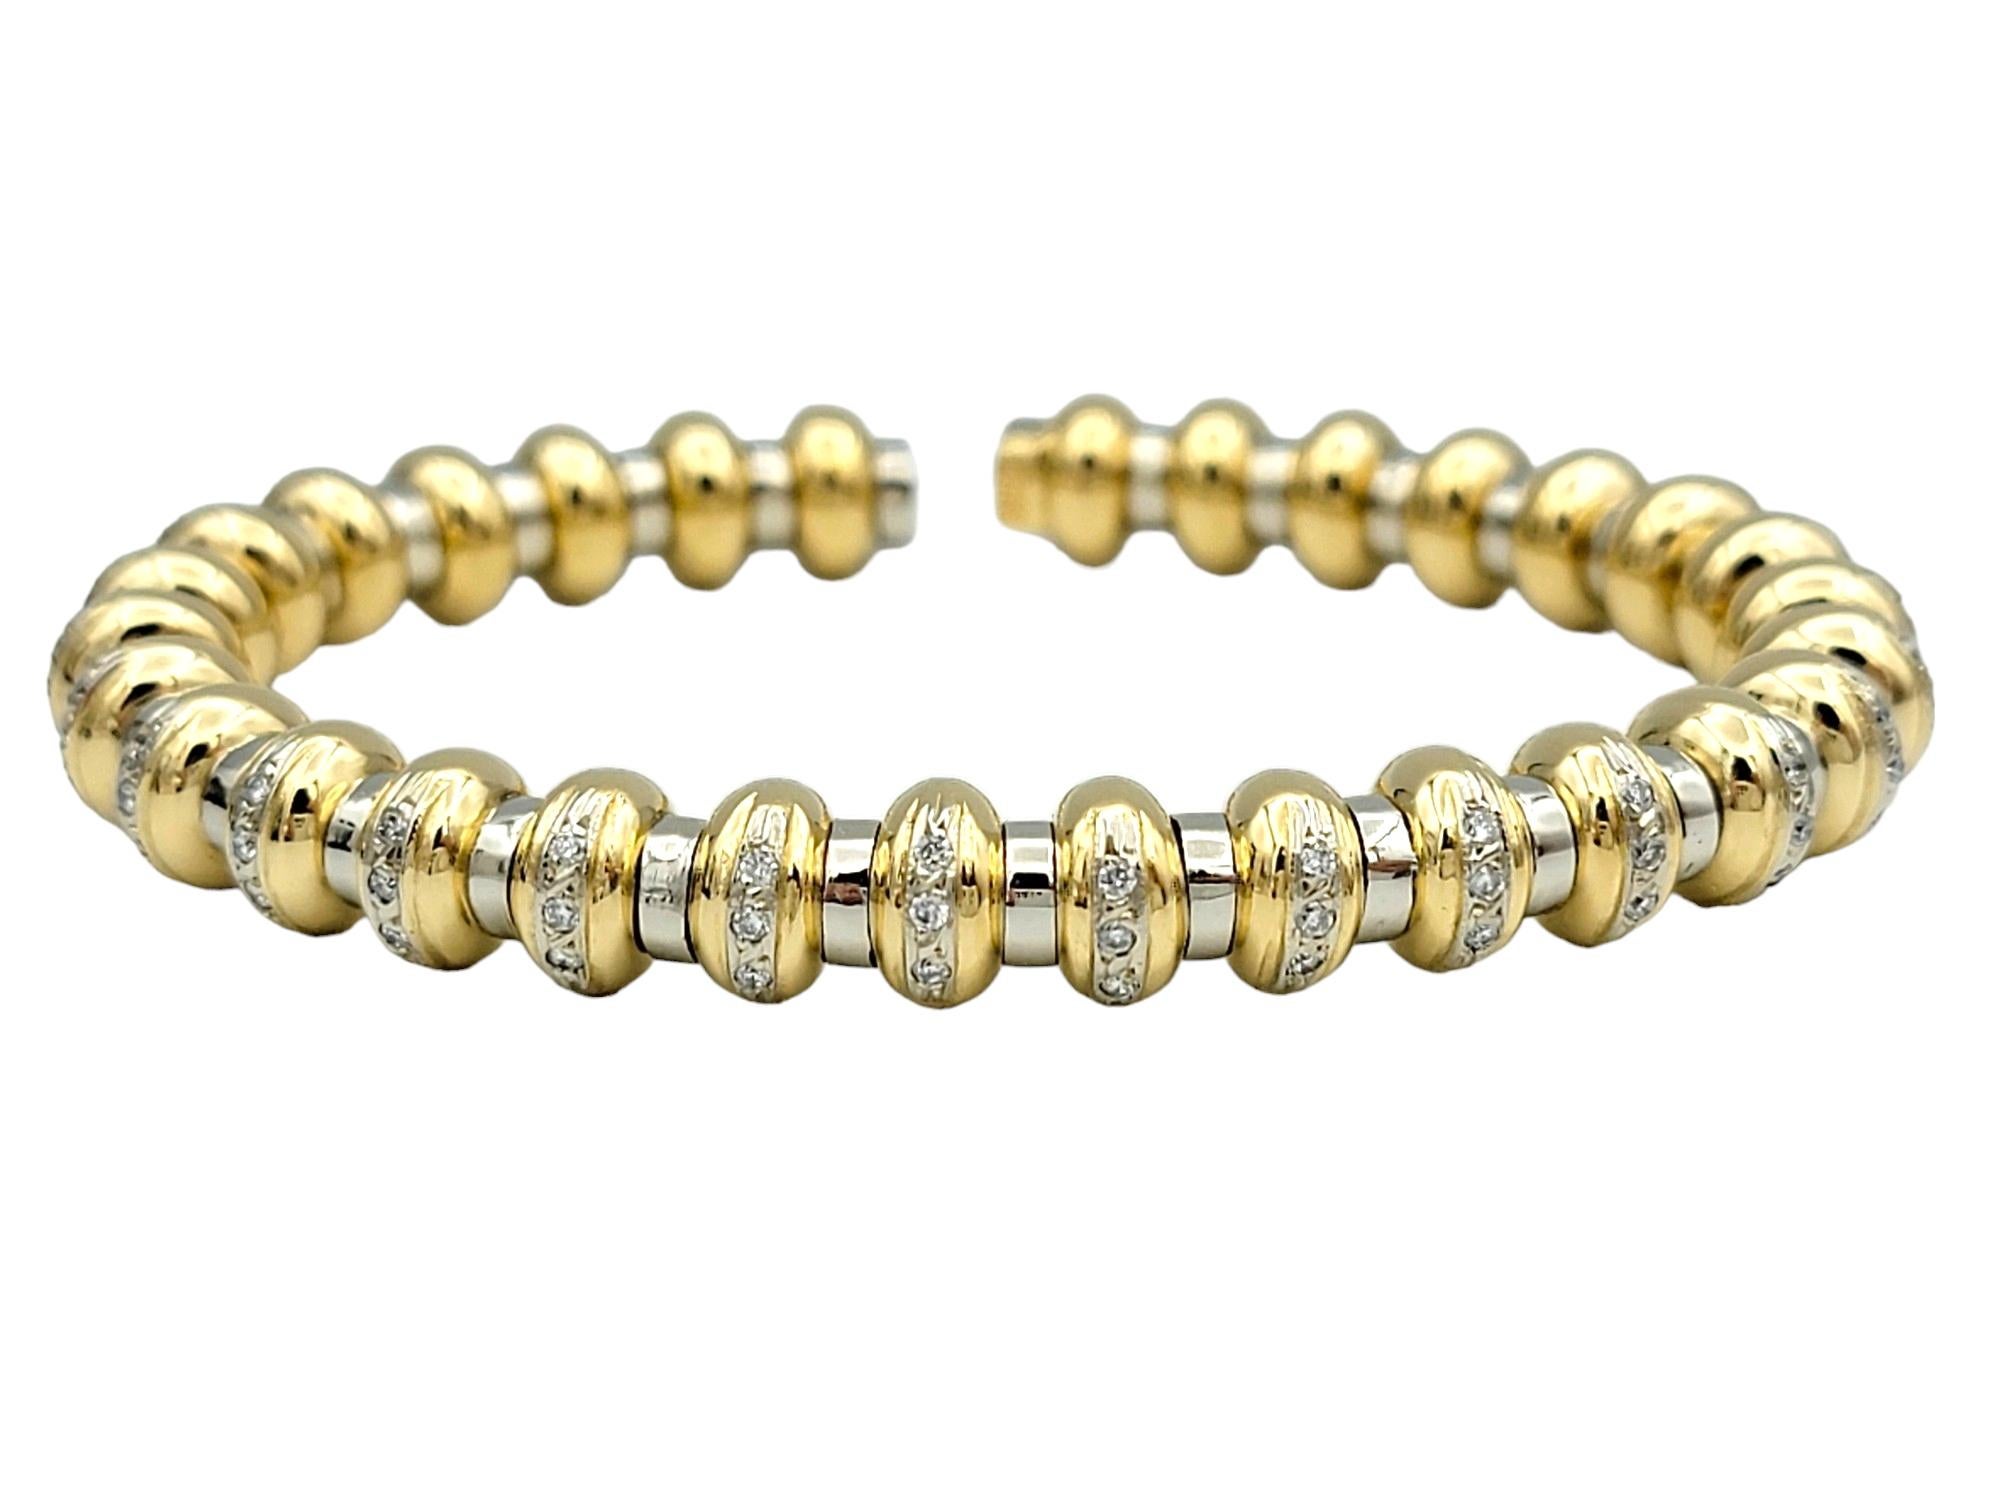 The inner circumference of this bracelet measures 5.88 inches and will comfortably fit up to a 5.75 inch wrist. 

This flexible cuff bracelet boasts a textured ridged design, alternating between 18 karat white and yellow gold, creating a dynamic